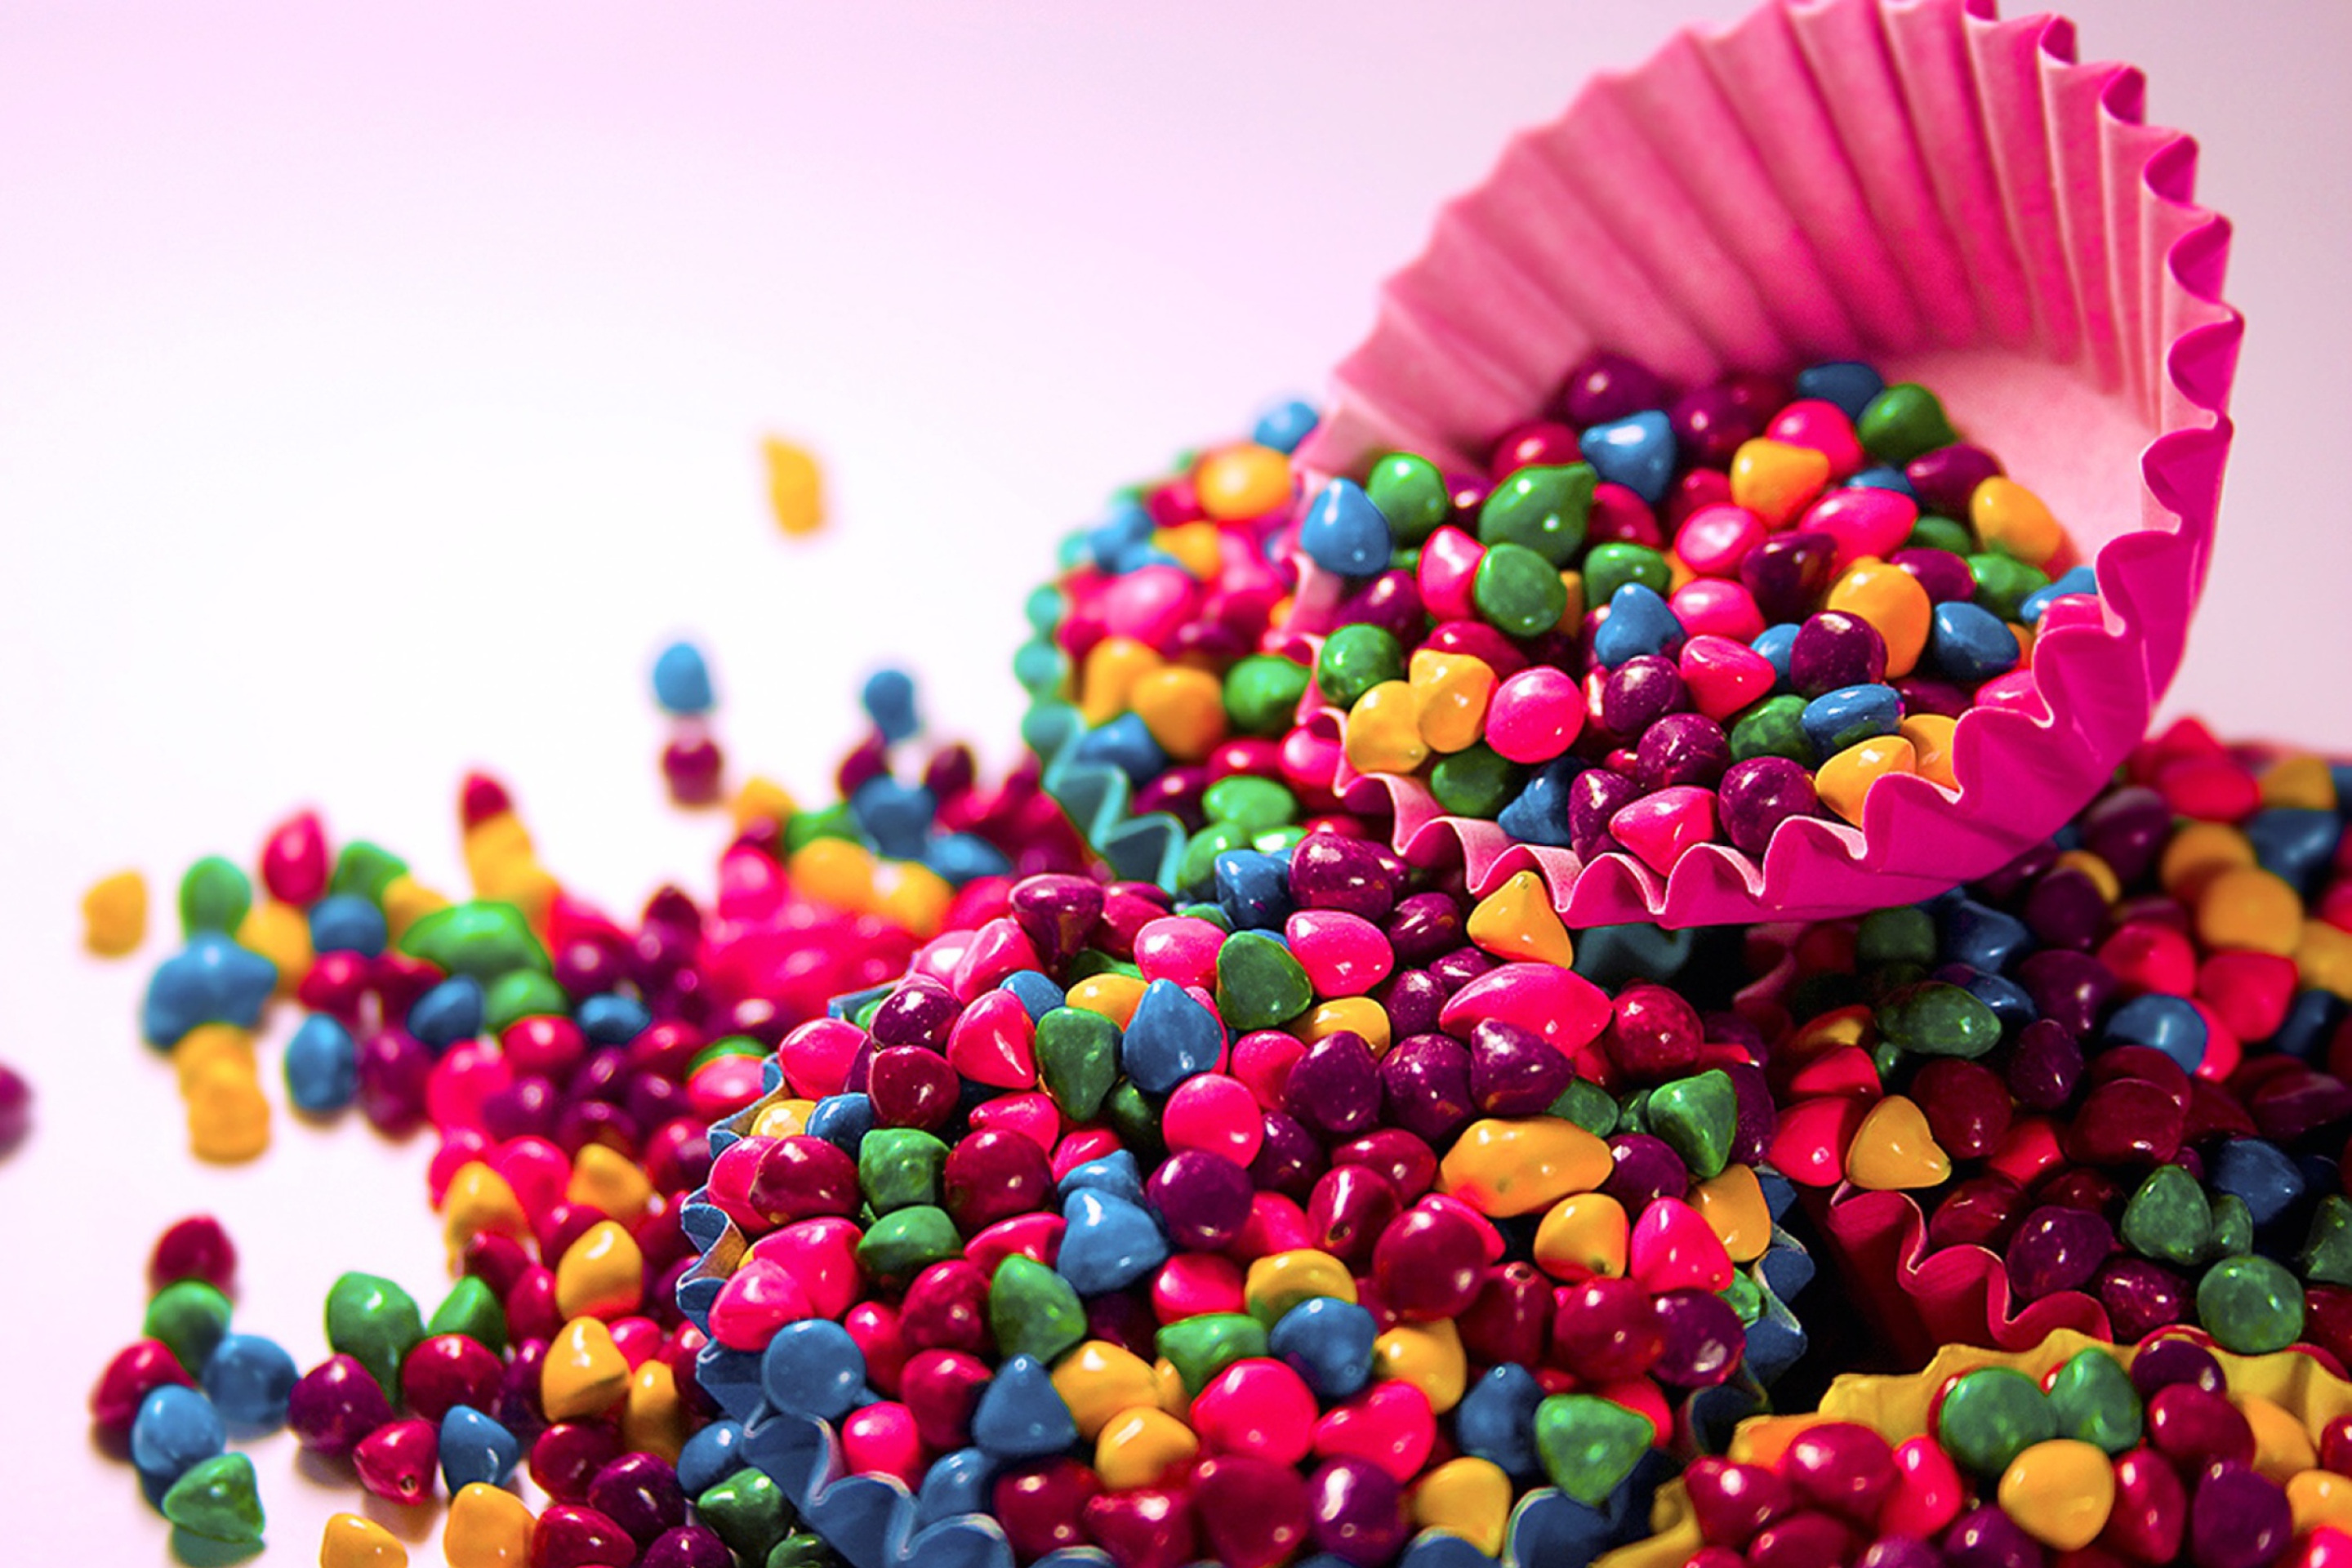 Colorful Candys wallpaper 2880x1920